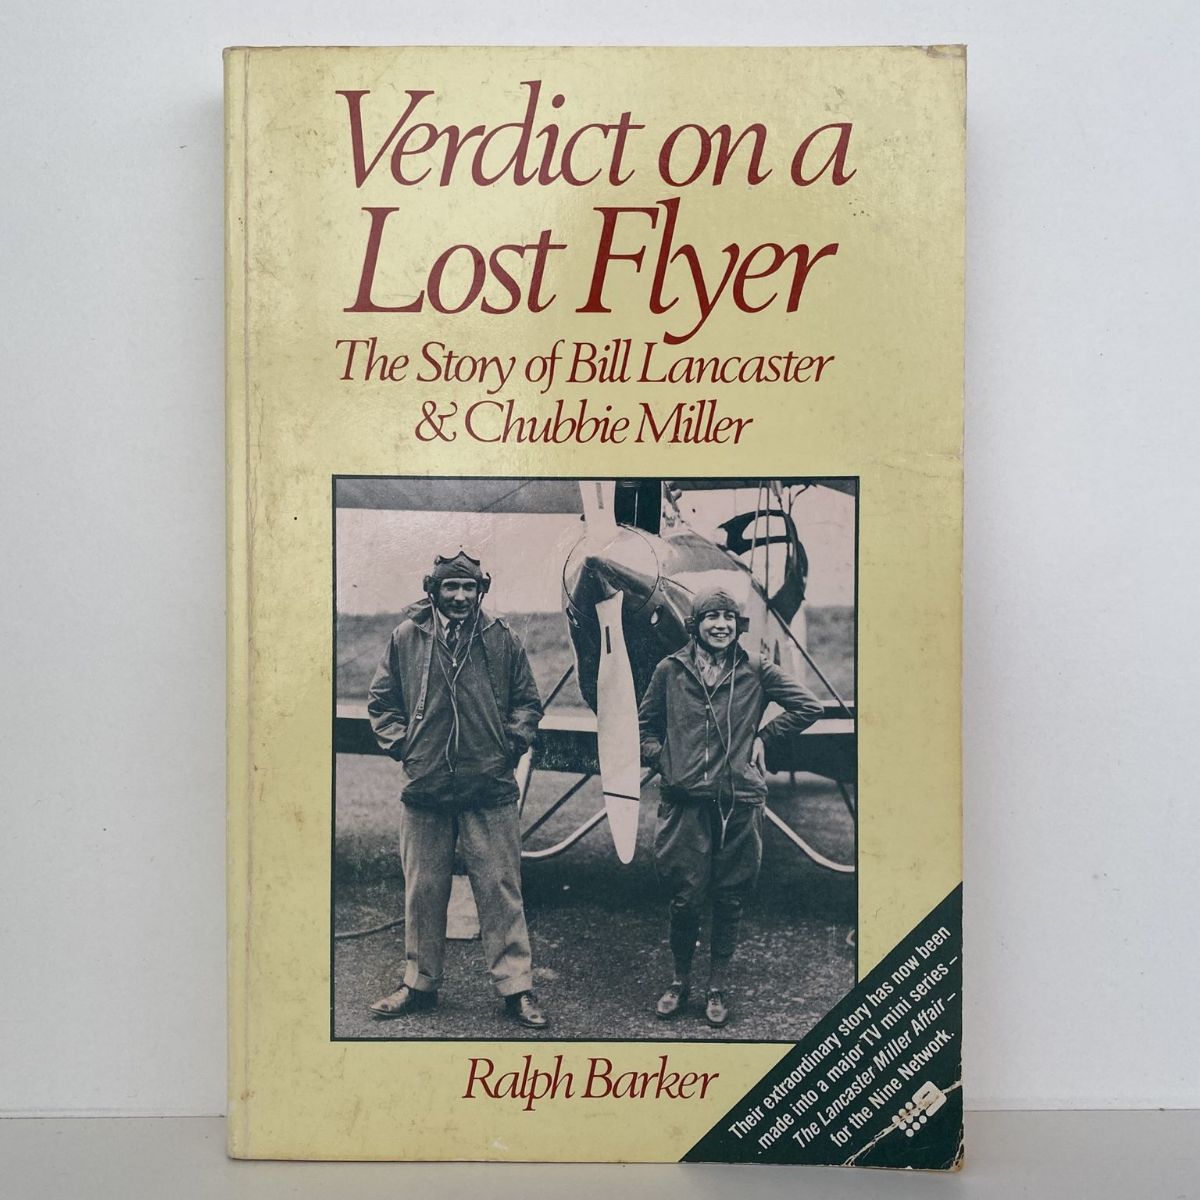 VERDICT ON A LOST FLYER: The Story of Bill Lancaster & Chubbie Miller